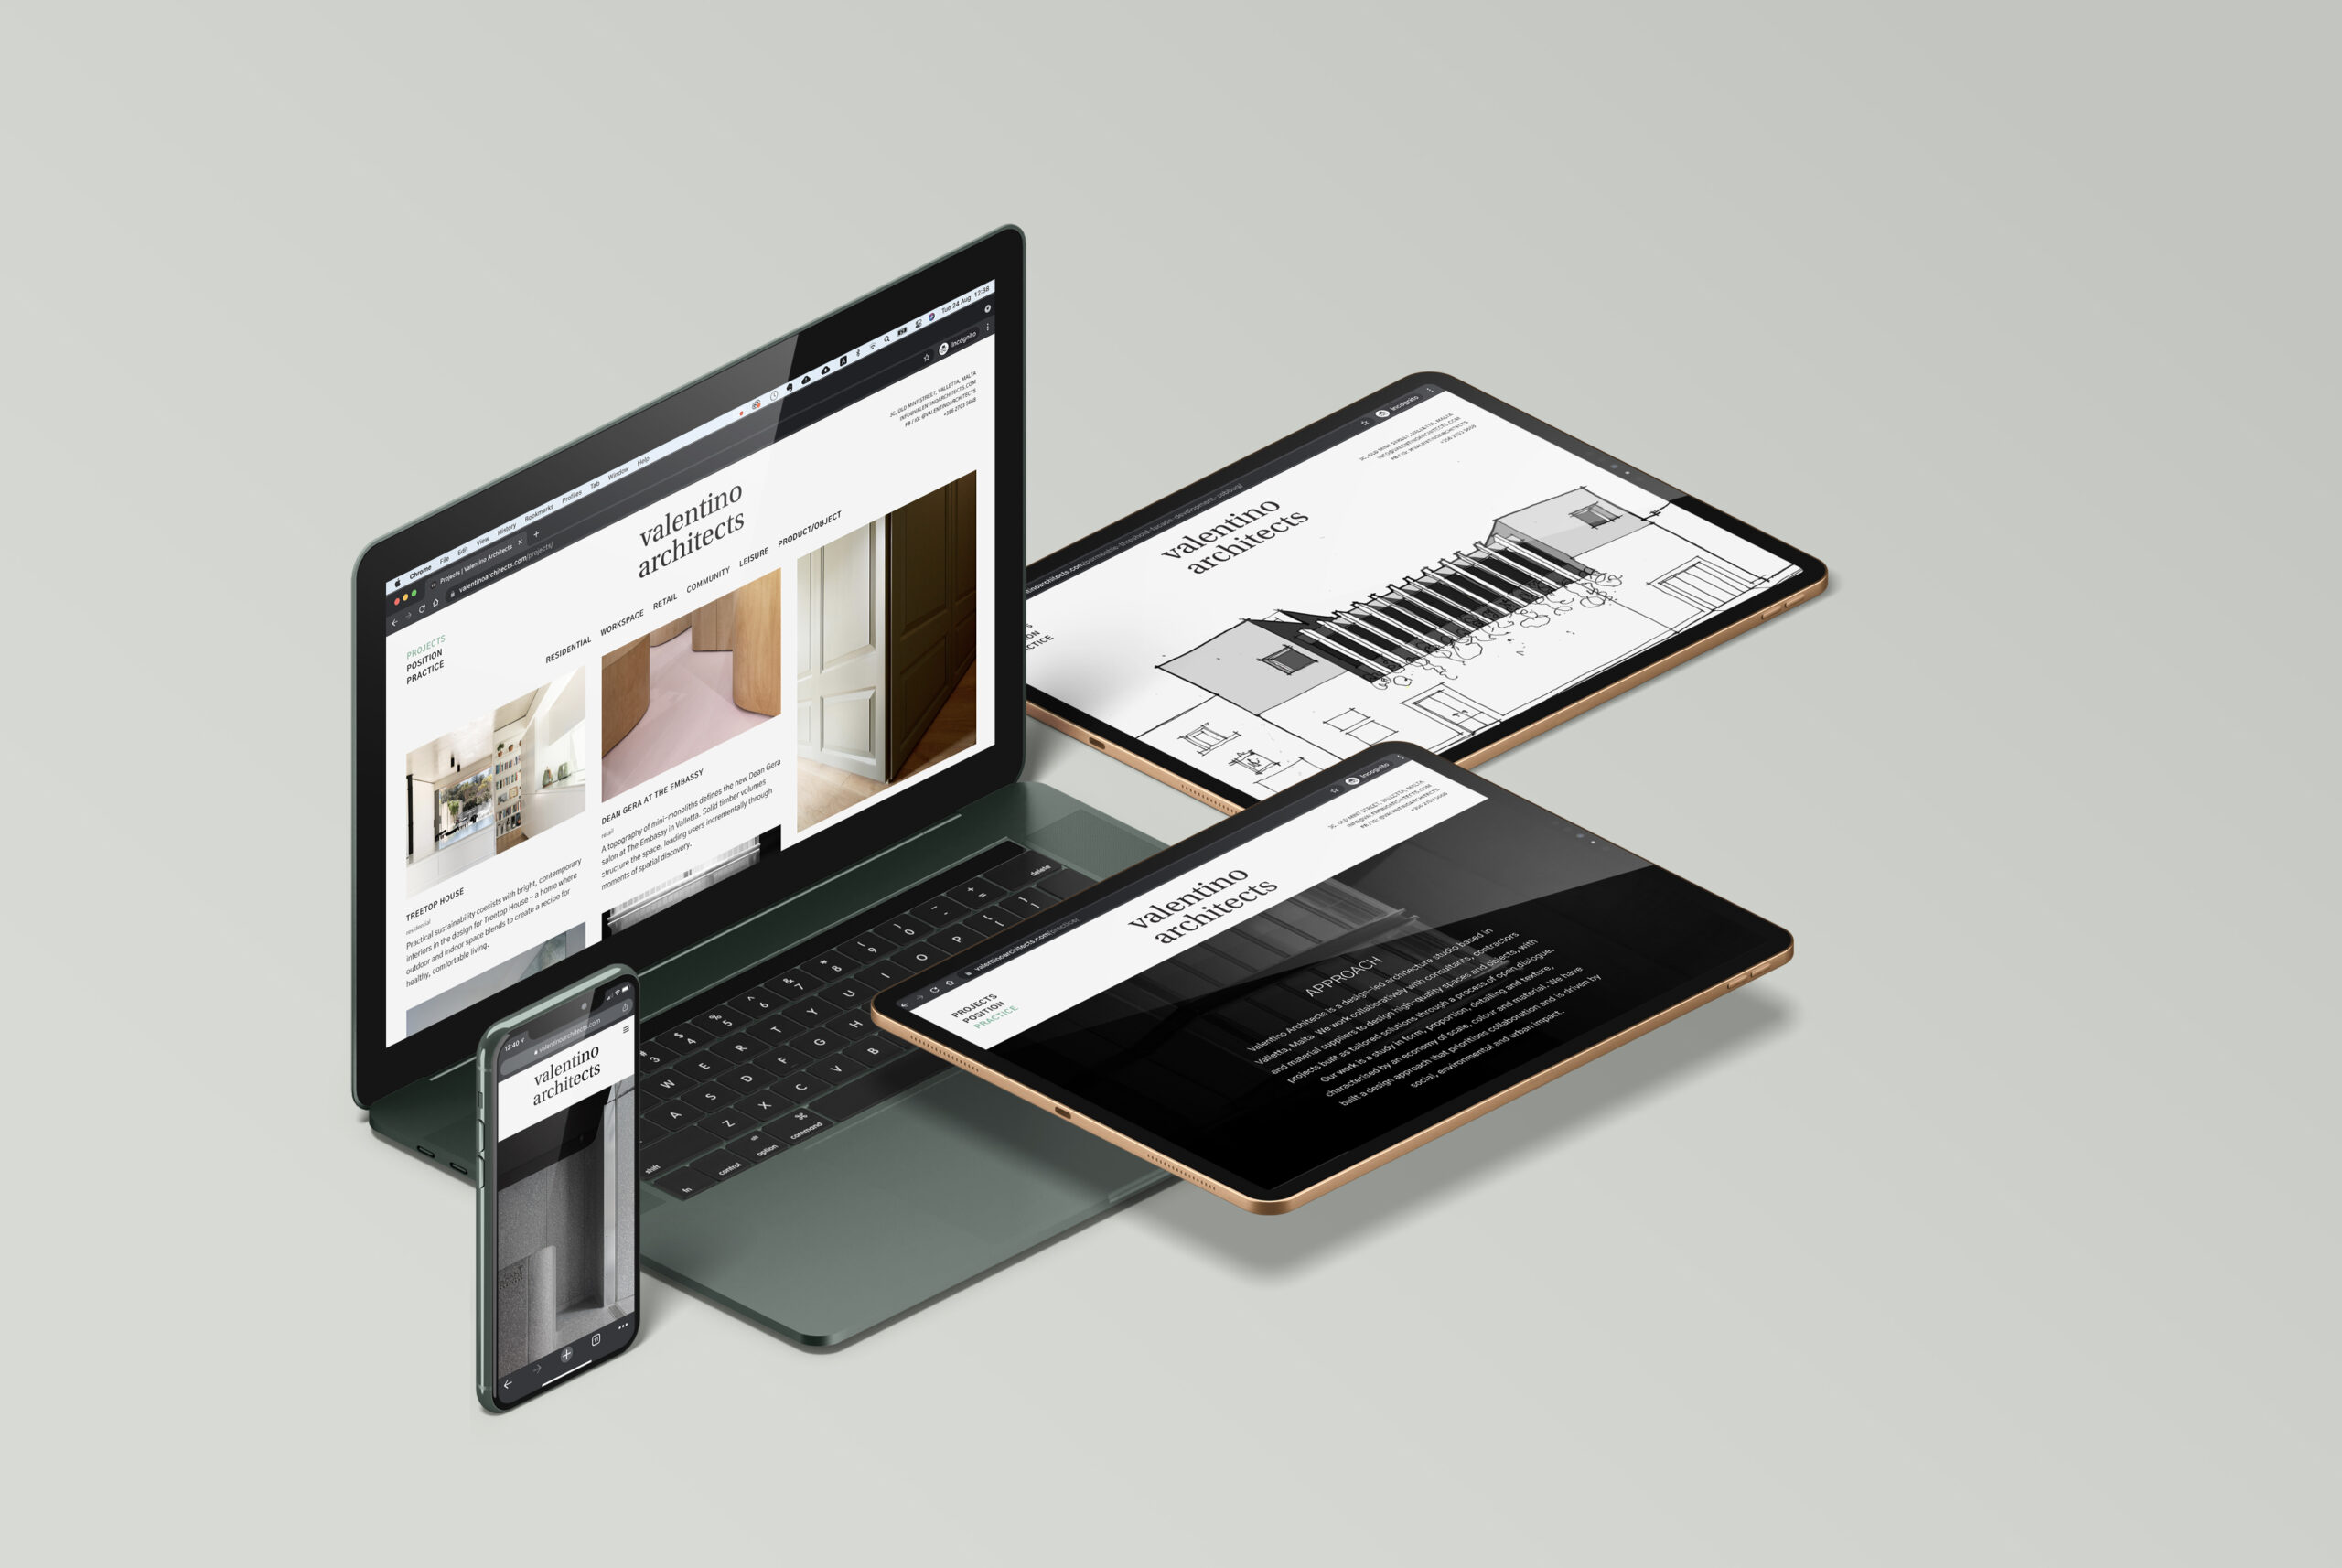 Website designed for Valentino Architects shortlisted at the 2022 Dezeen Awards